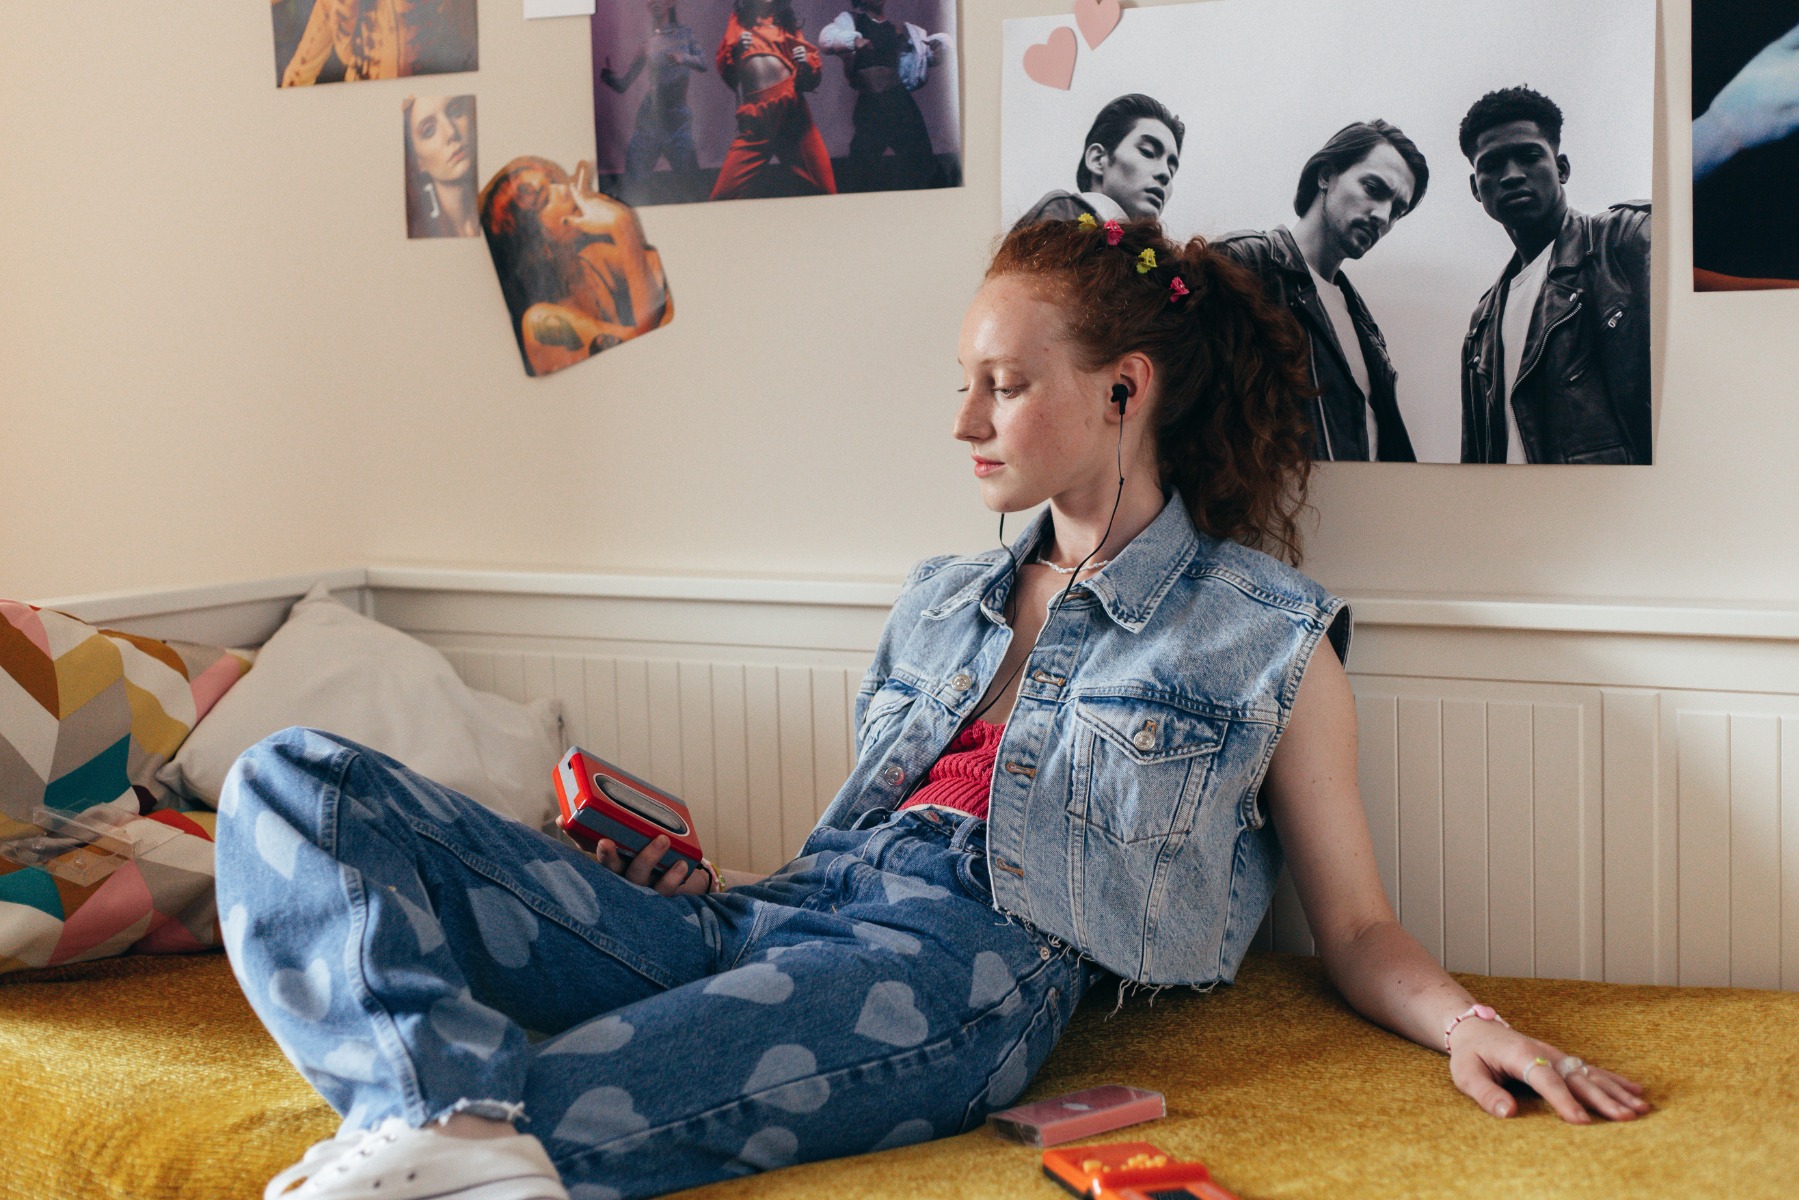 A teenager sitting on a bed listening to music